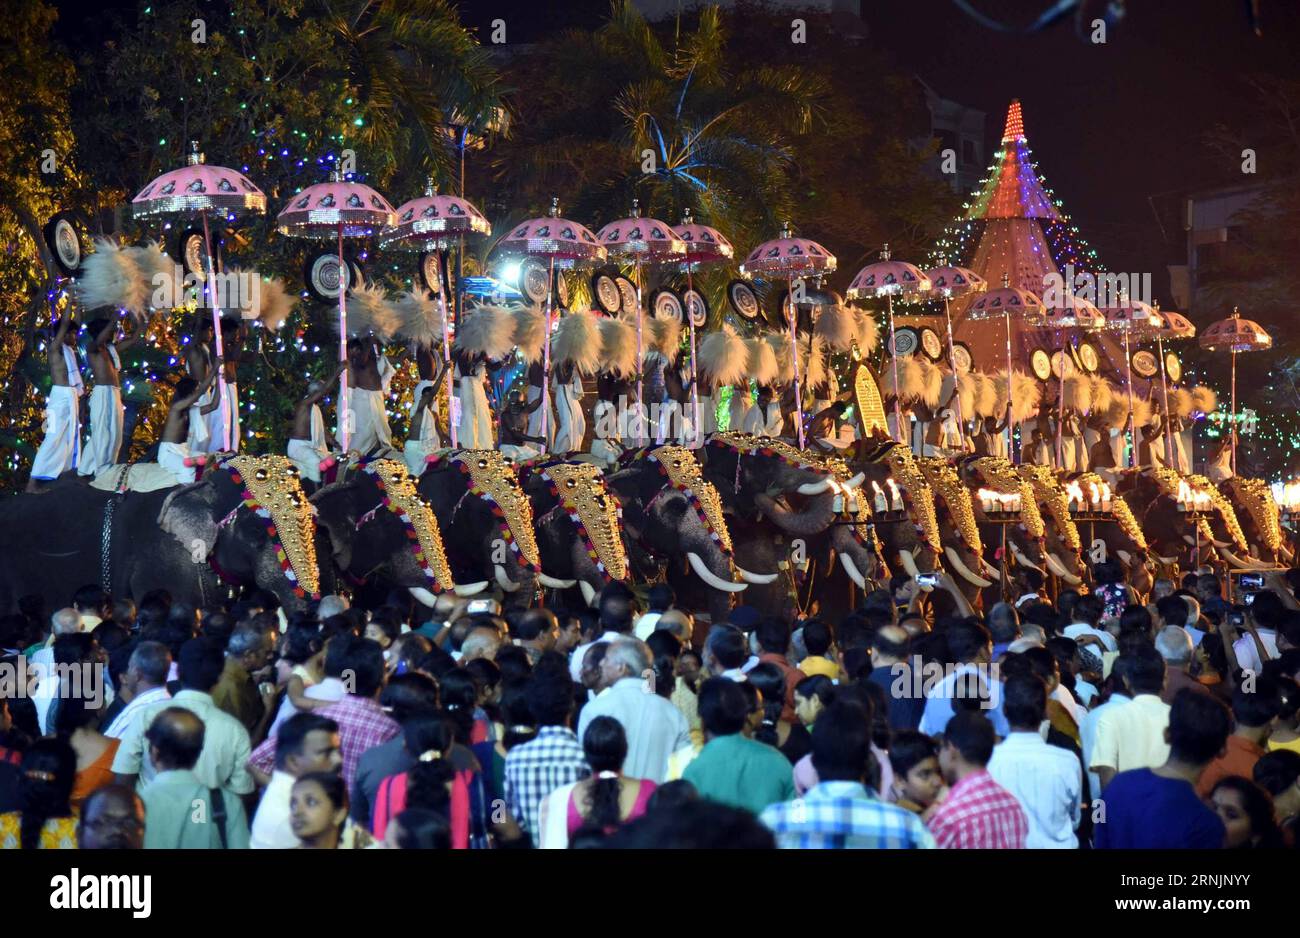 Decorated elephants take part in a celebration of Pooram Festival at Ernakulam Shiva temple in Kochi, southwestern Indian state of Kerala, Feb. 7, 2017. Pooram is an annual festival, which is celebrated in temples dedicated to goddesses Durga or Kali held especially in Valluvanadu area and other adjoining parts of north-central Kerala. ) INDIA-KOCHI-POORAM FESTIVAL-ELEPHANTS Stringer PUBLICATIONxNOTxINxCHN   decorated Elephants Take Part in a Celebration of Pooram Festival AT Ernakulam Shiva Temple in Kochi South Western Indian State of Kerala Feb 7 2017 Pooram IS to Annual Festival Which IS c Stock Photo